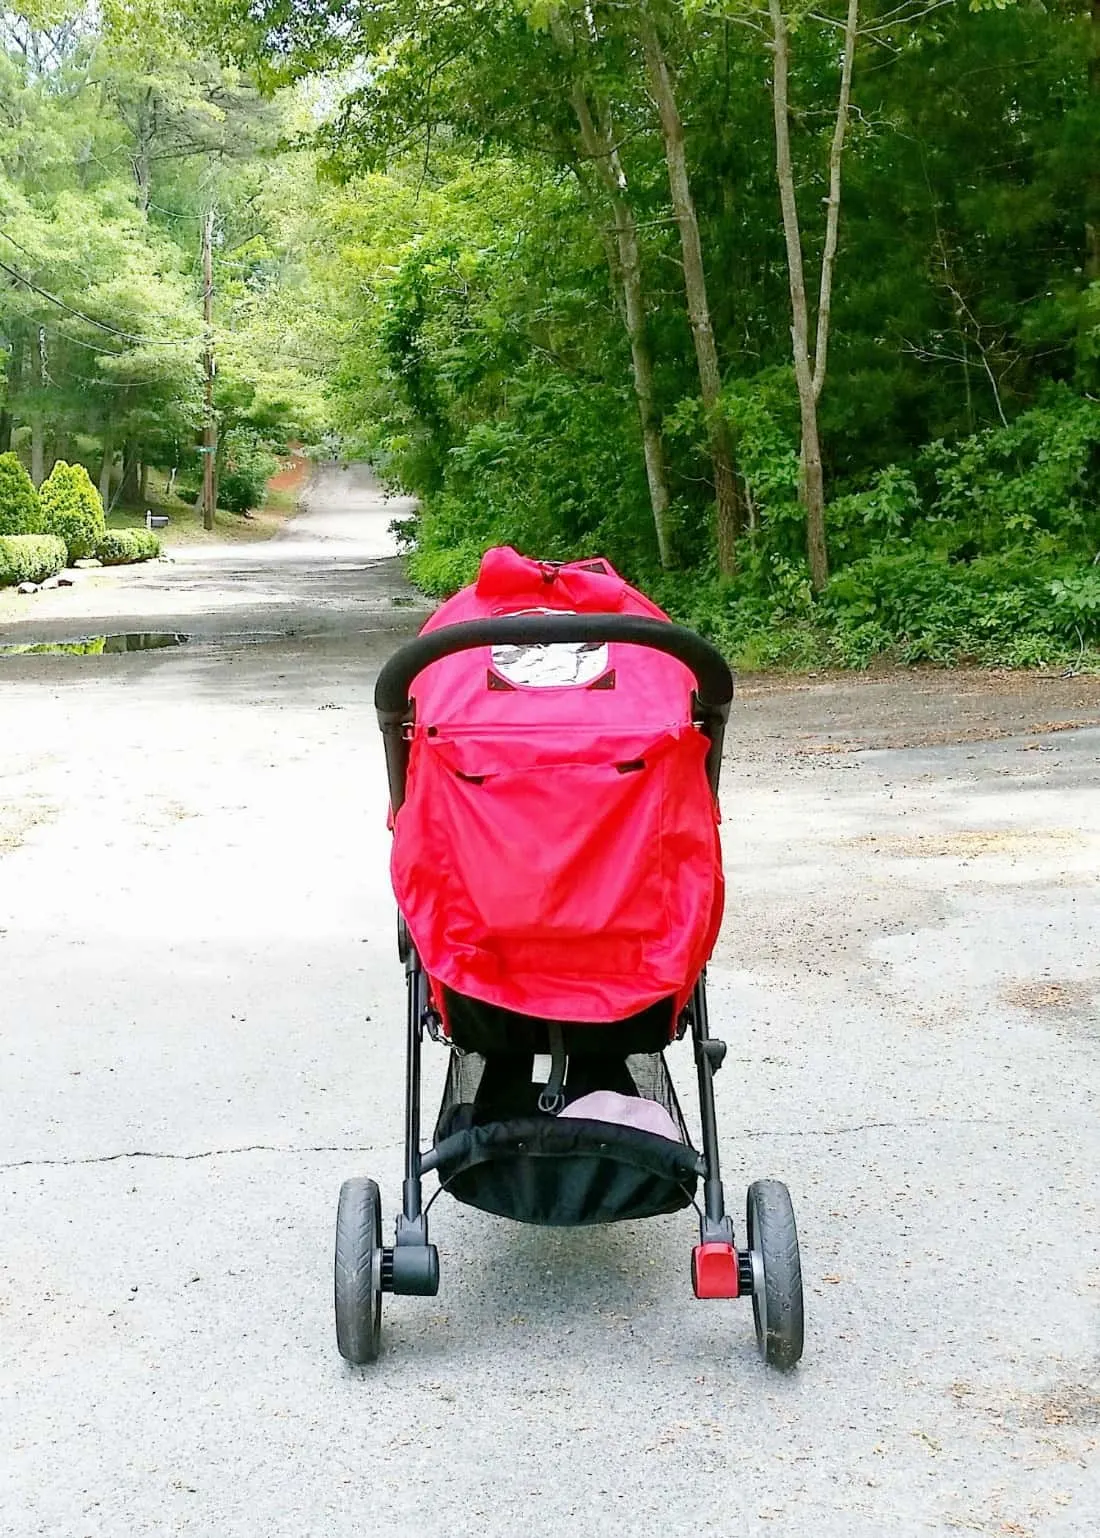 Baby Jogger Cite Lite stroller on paved path.